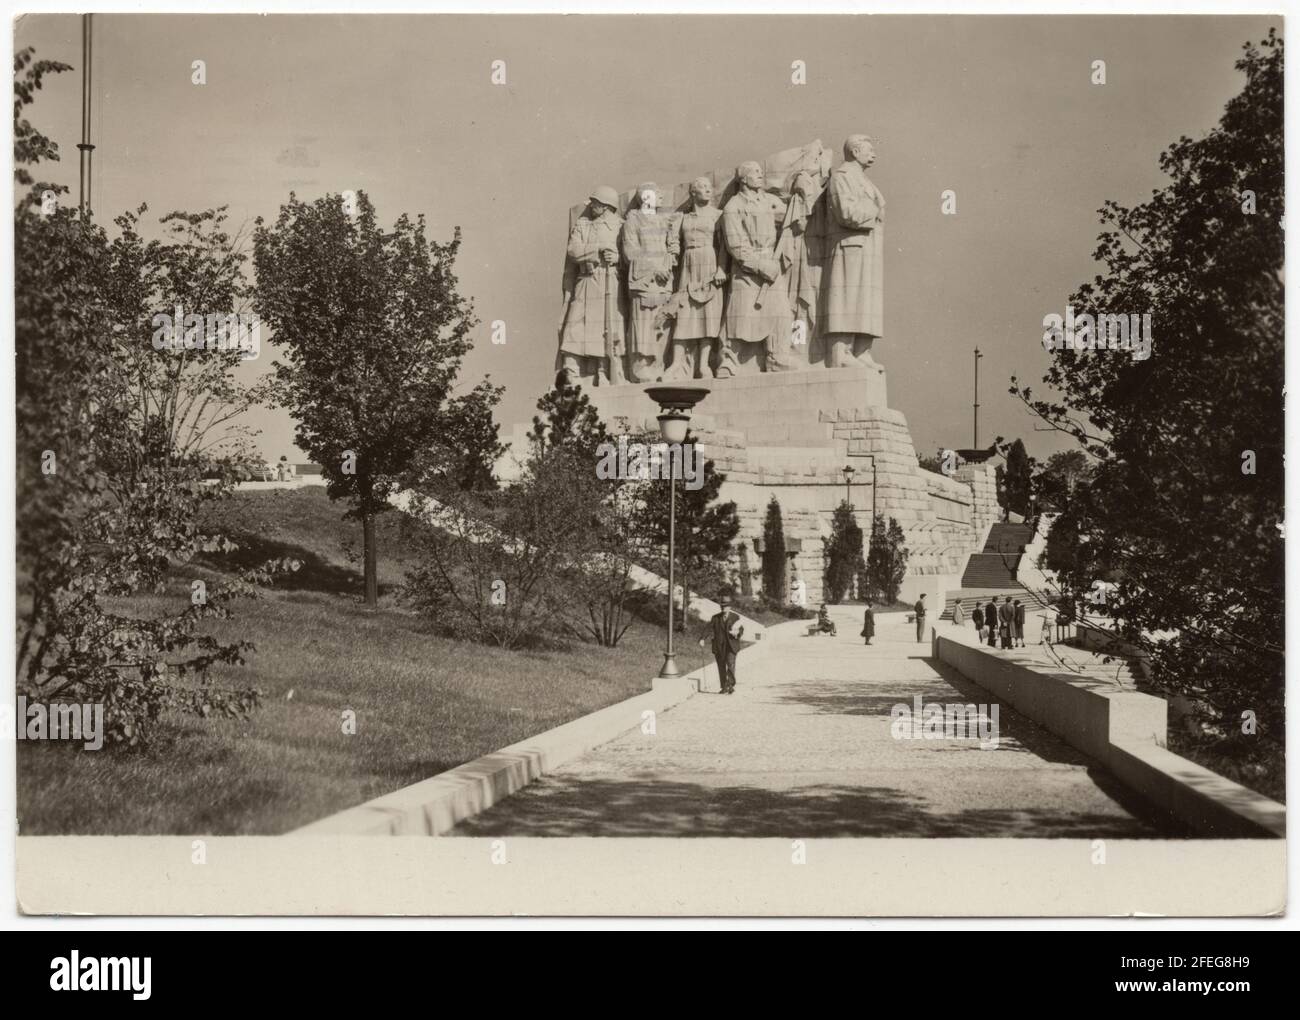 Stalin's Monument in Prague, Czechoslovakia, depicted in the Czechoslovak vintage postcard issued in 1955. Courtesy of the Azoor Postcard Collection. Stock Photo